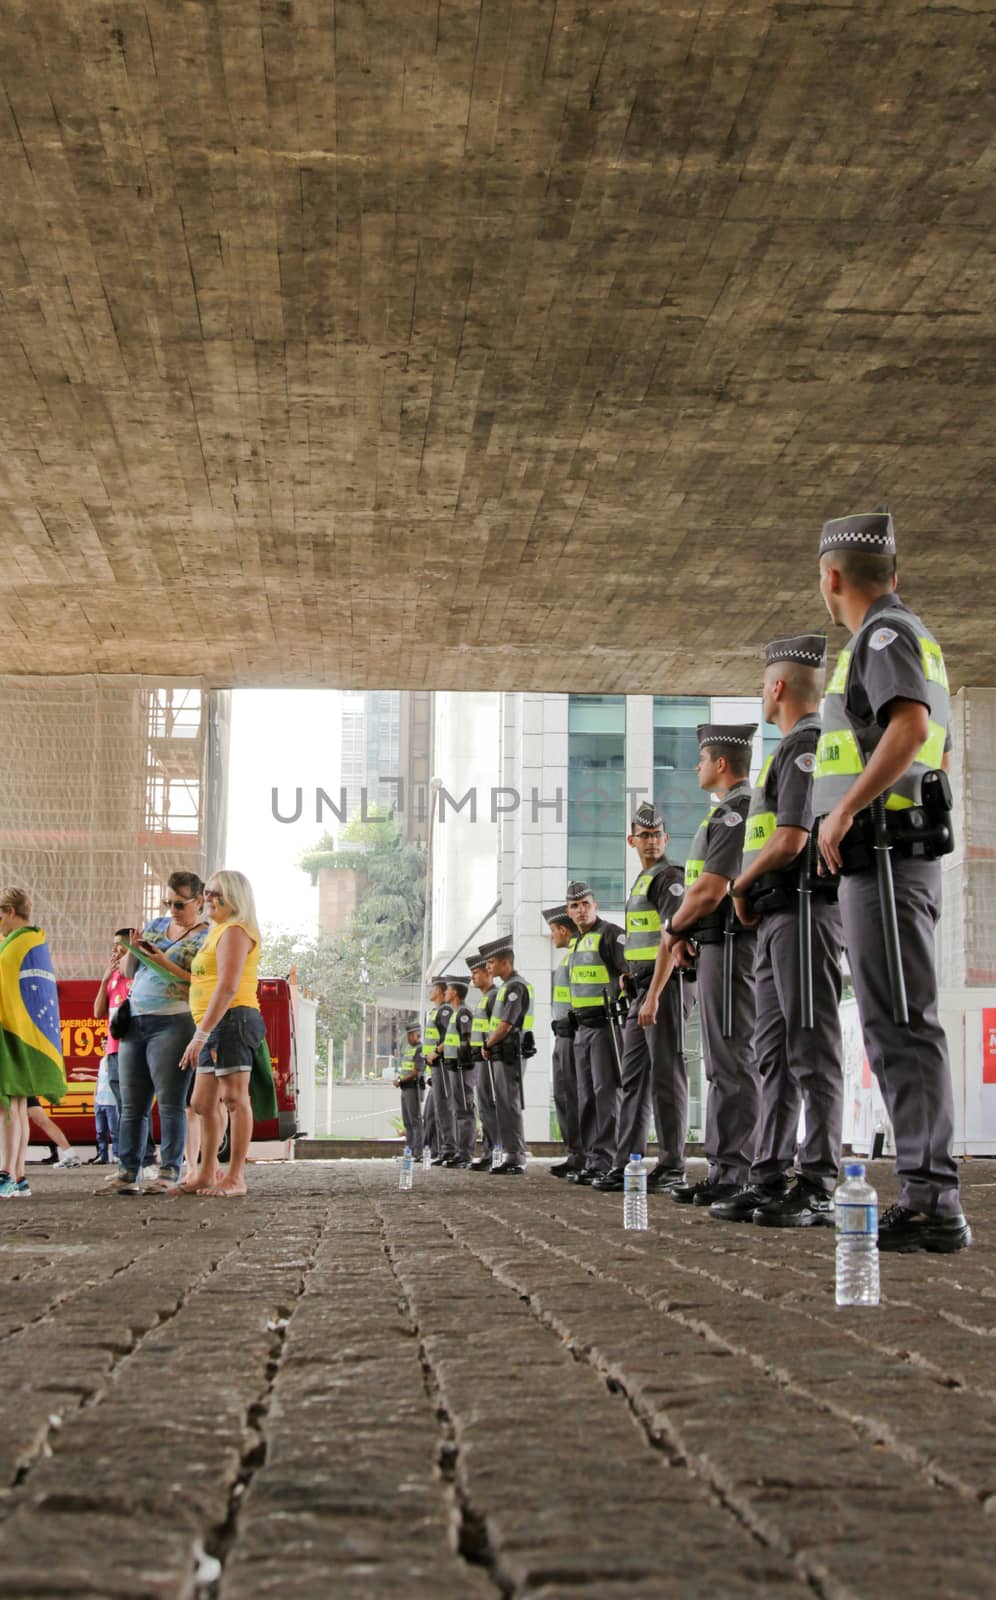 SAO PAULO, BRAZIL August 16, 2015: An unidentified group of cops take care of security in the protest against federal government corruption in Sao Paulo Brazil.